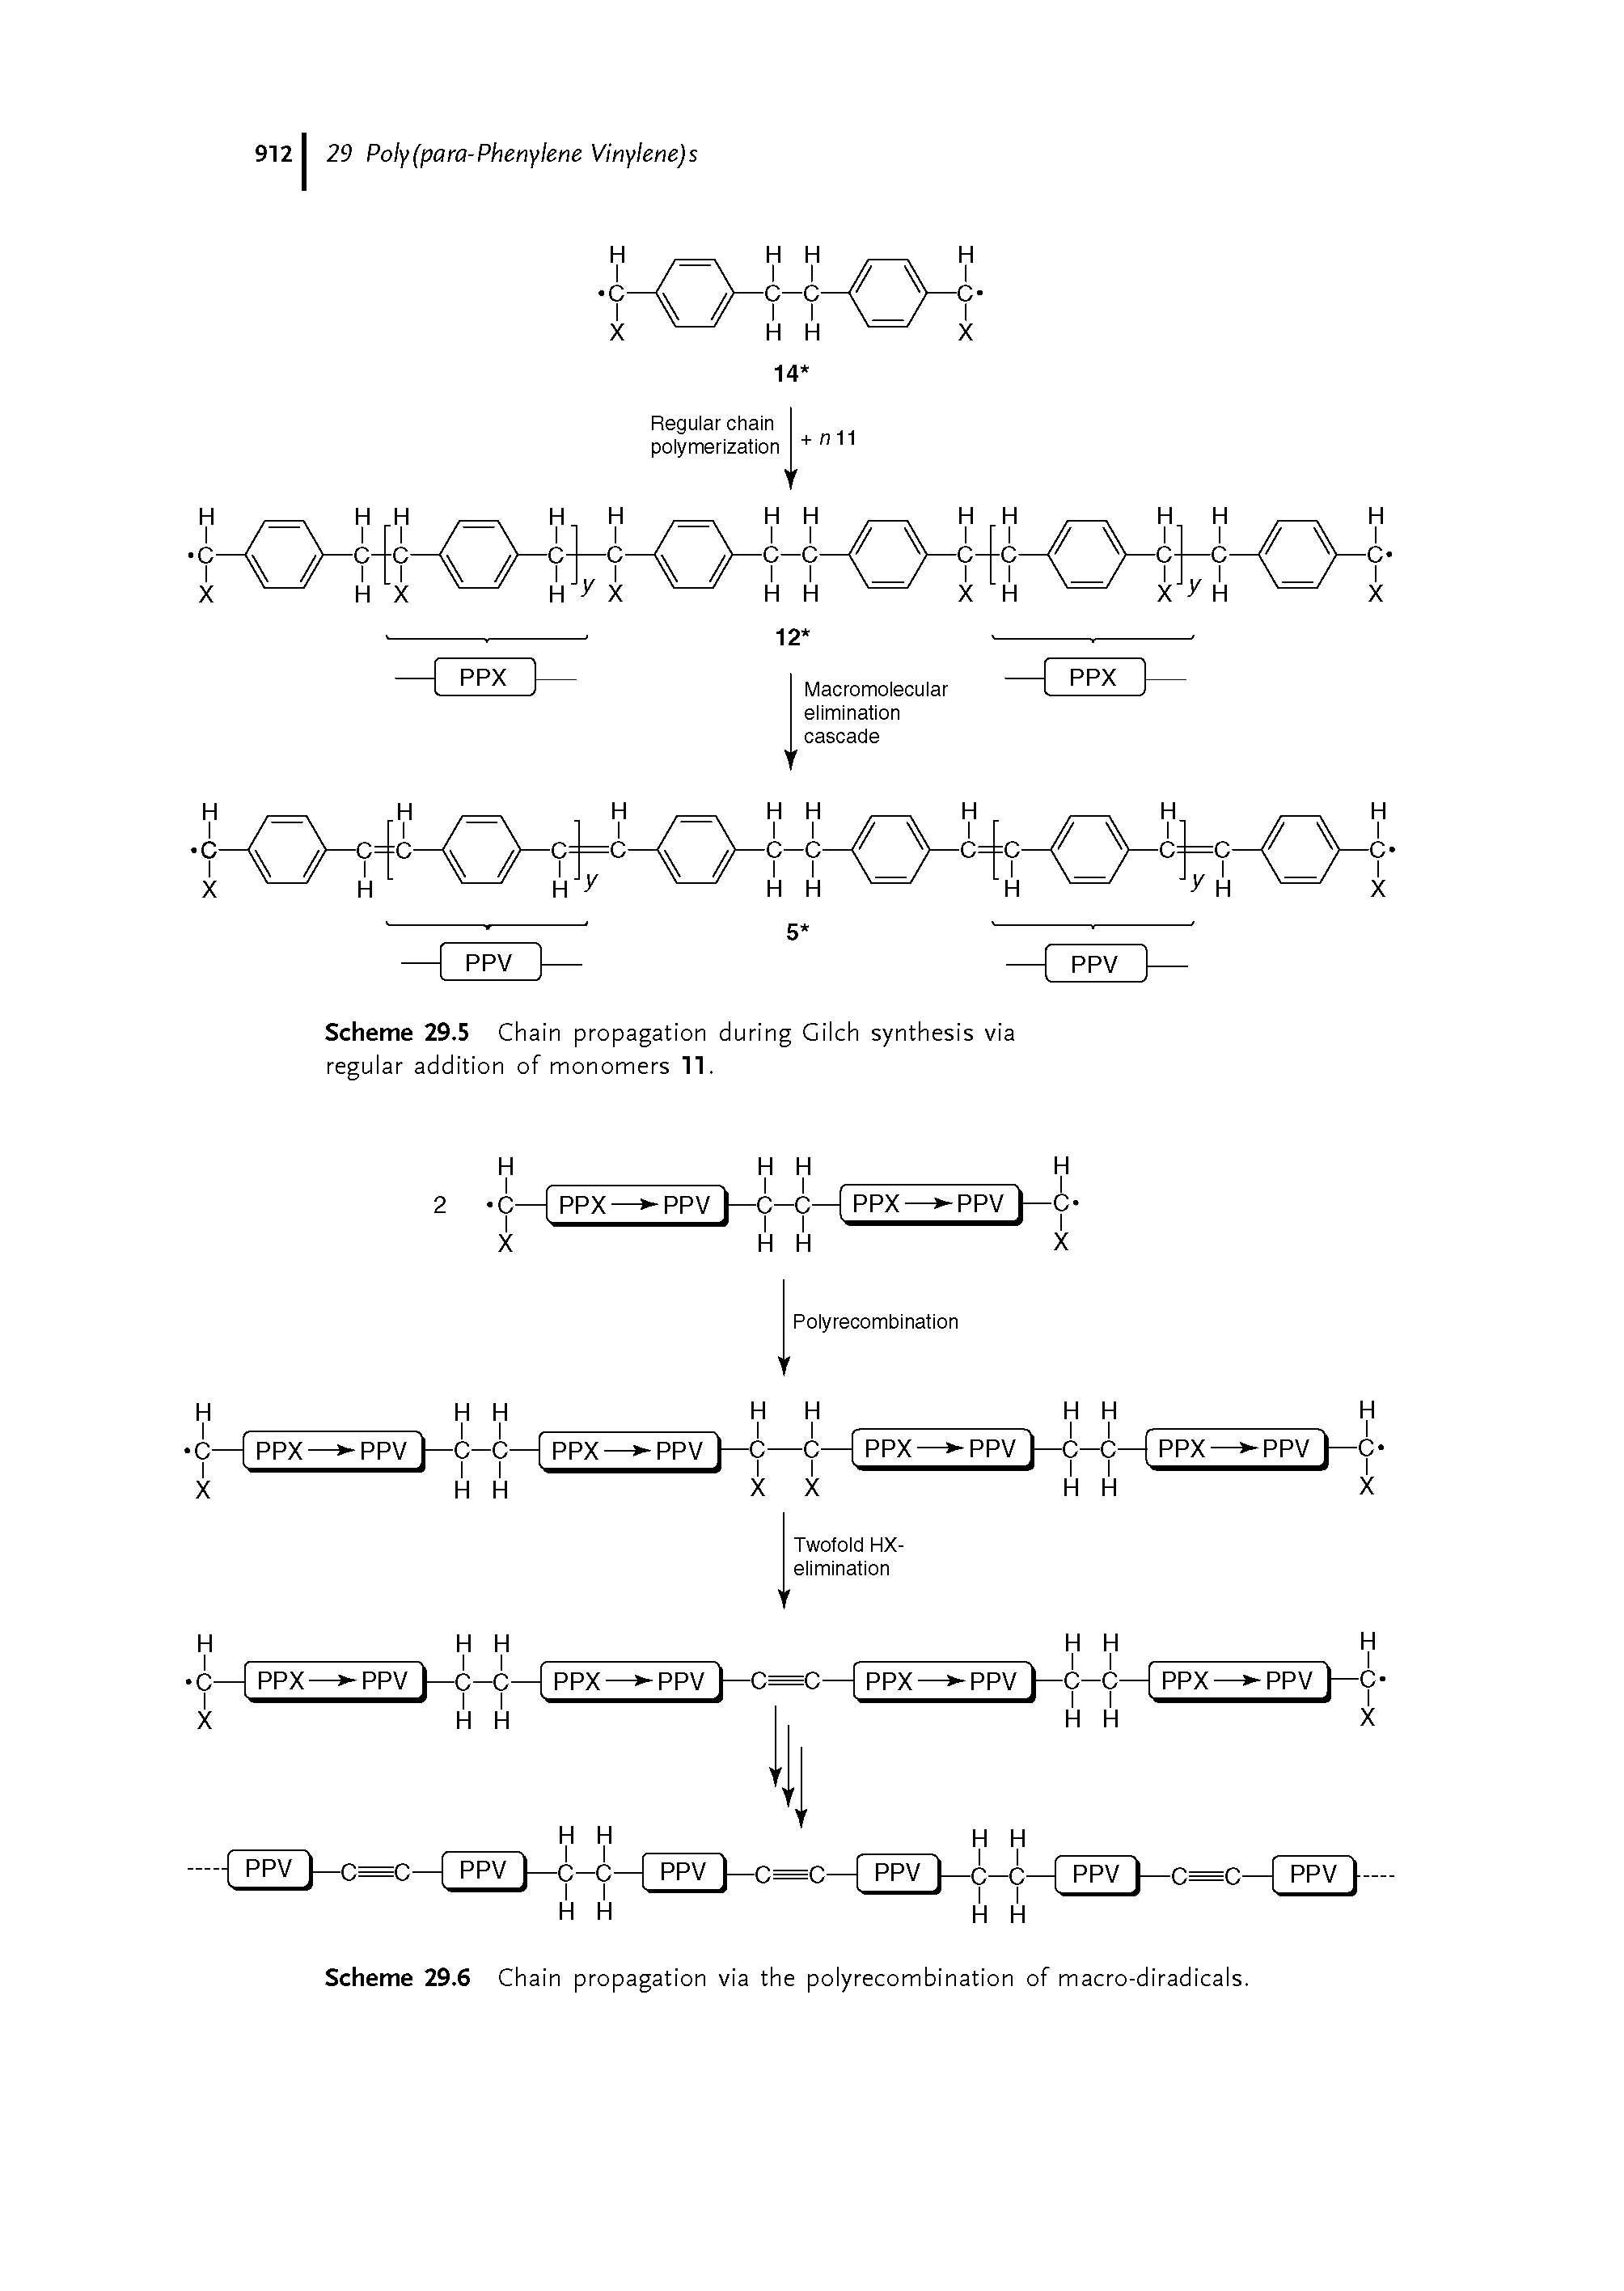 Scheme 29.5 Chain propagation during Gilch synthesis via regular addition of monomers 11.